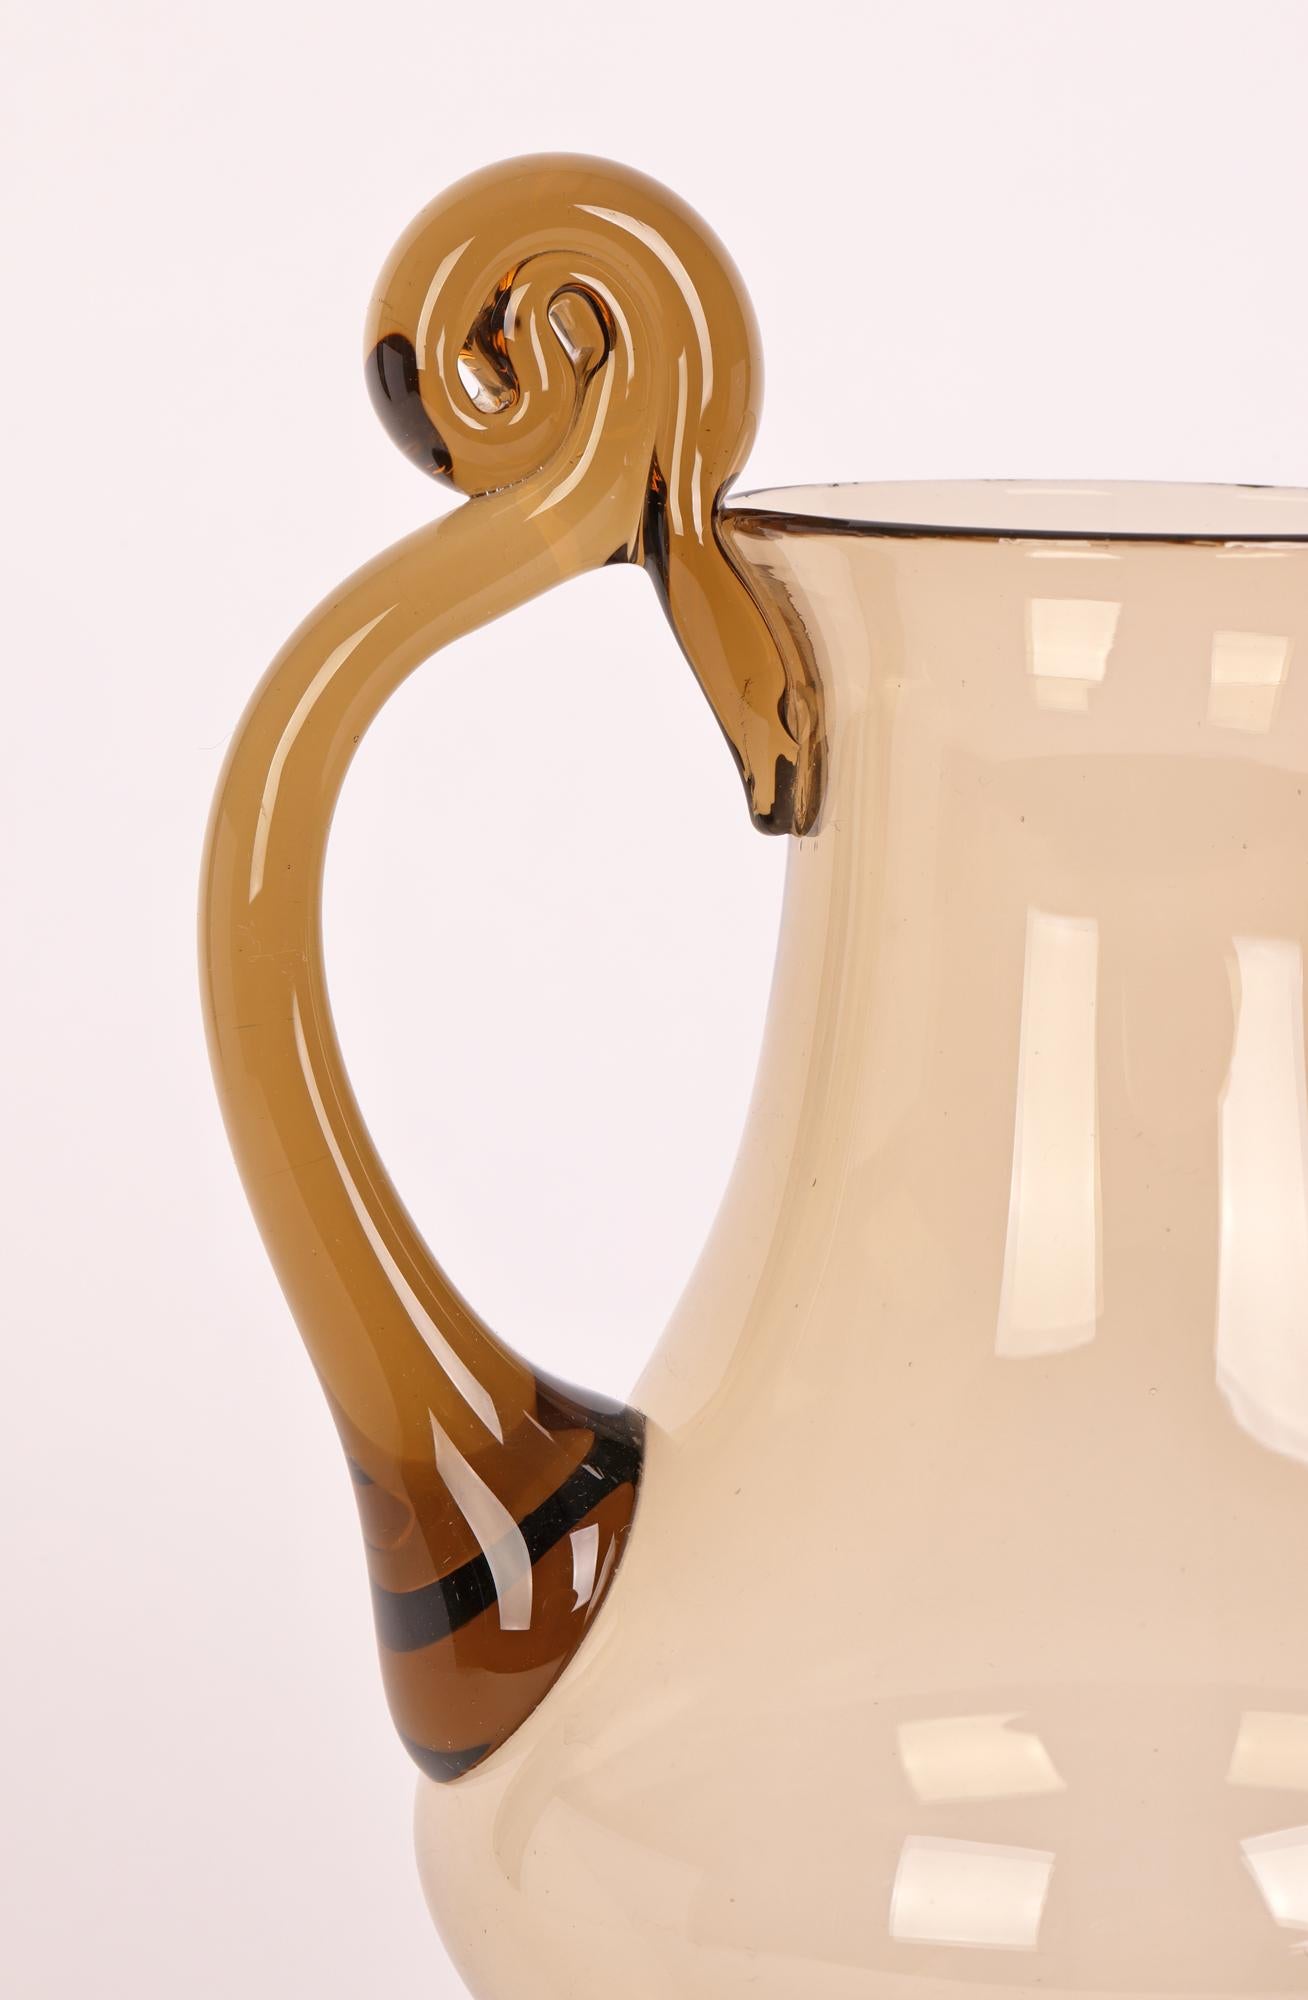 A very fine and elegant vintage Italian Murano Soffiato brown tinted glass handled jug attributed to MVM Cappellin dating between 1930 and 1950. Typical in style and design of the work of renowned artist Vittorio Zecchin (Italian, 1878 – 1947) the